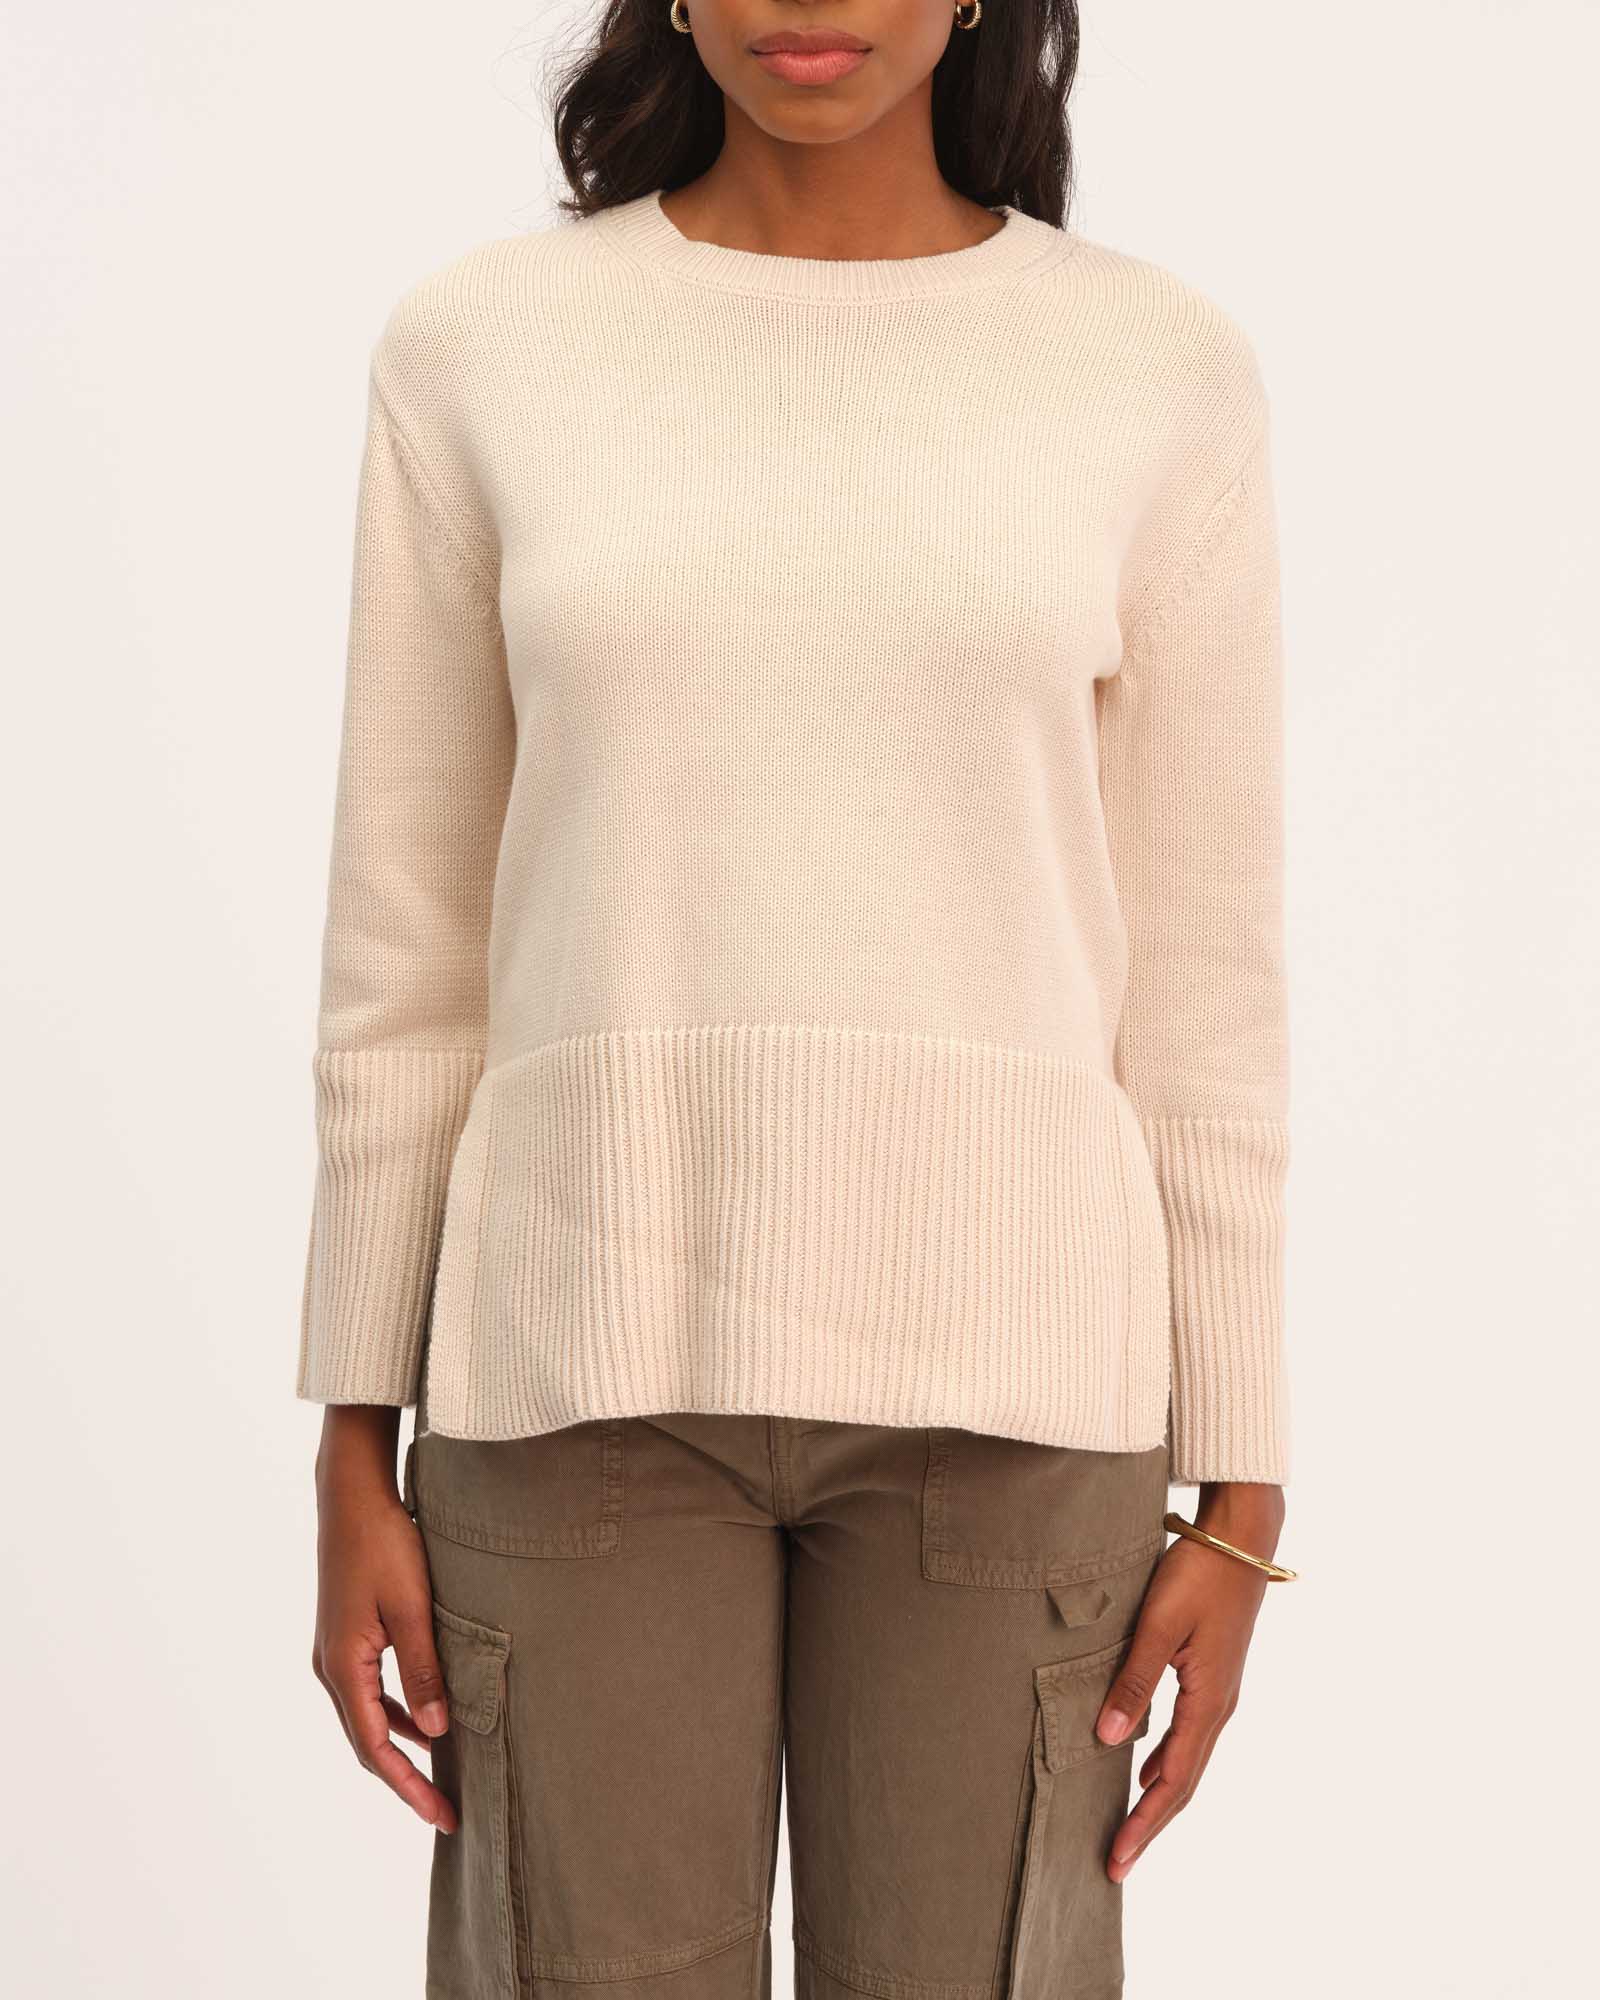 For The Republic Women's Classic Crewneck Sweater with Side Vents | JANE + MERCER